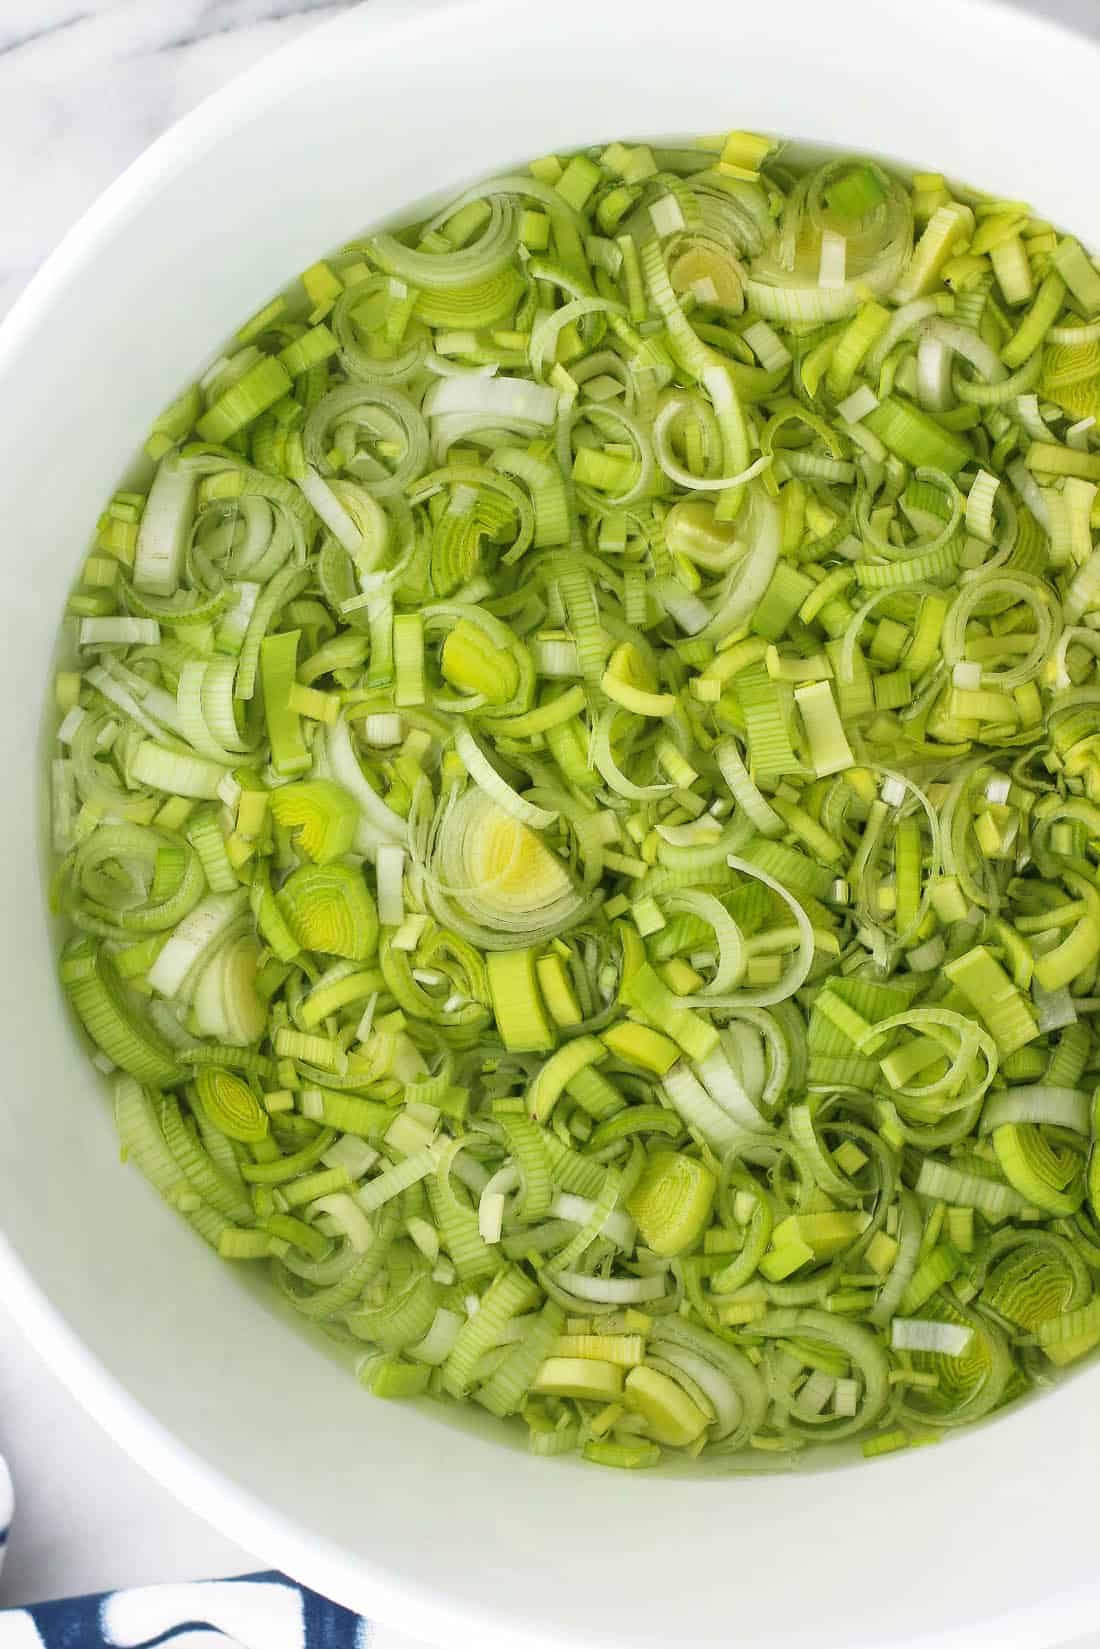 Thinly-sliced leeks in a large plastic bowl of water.